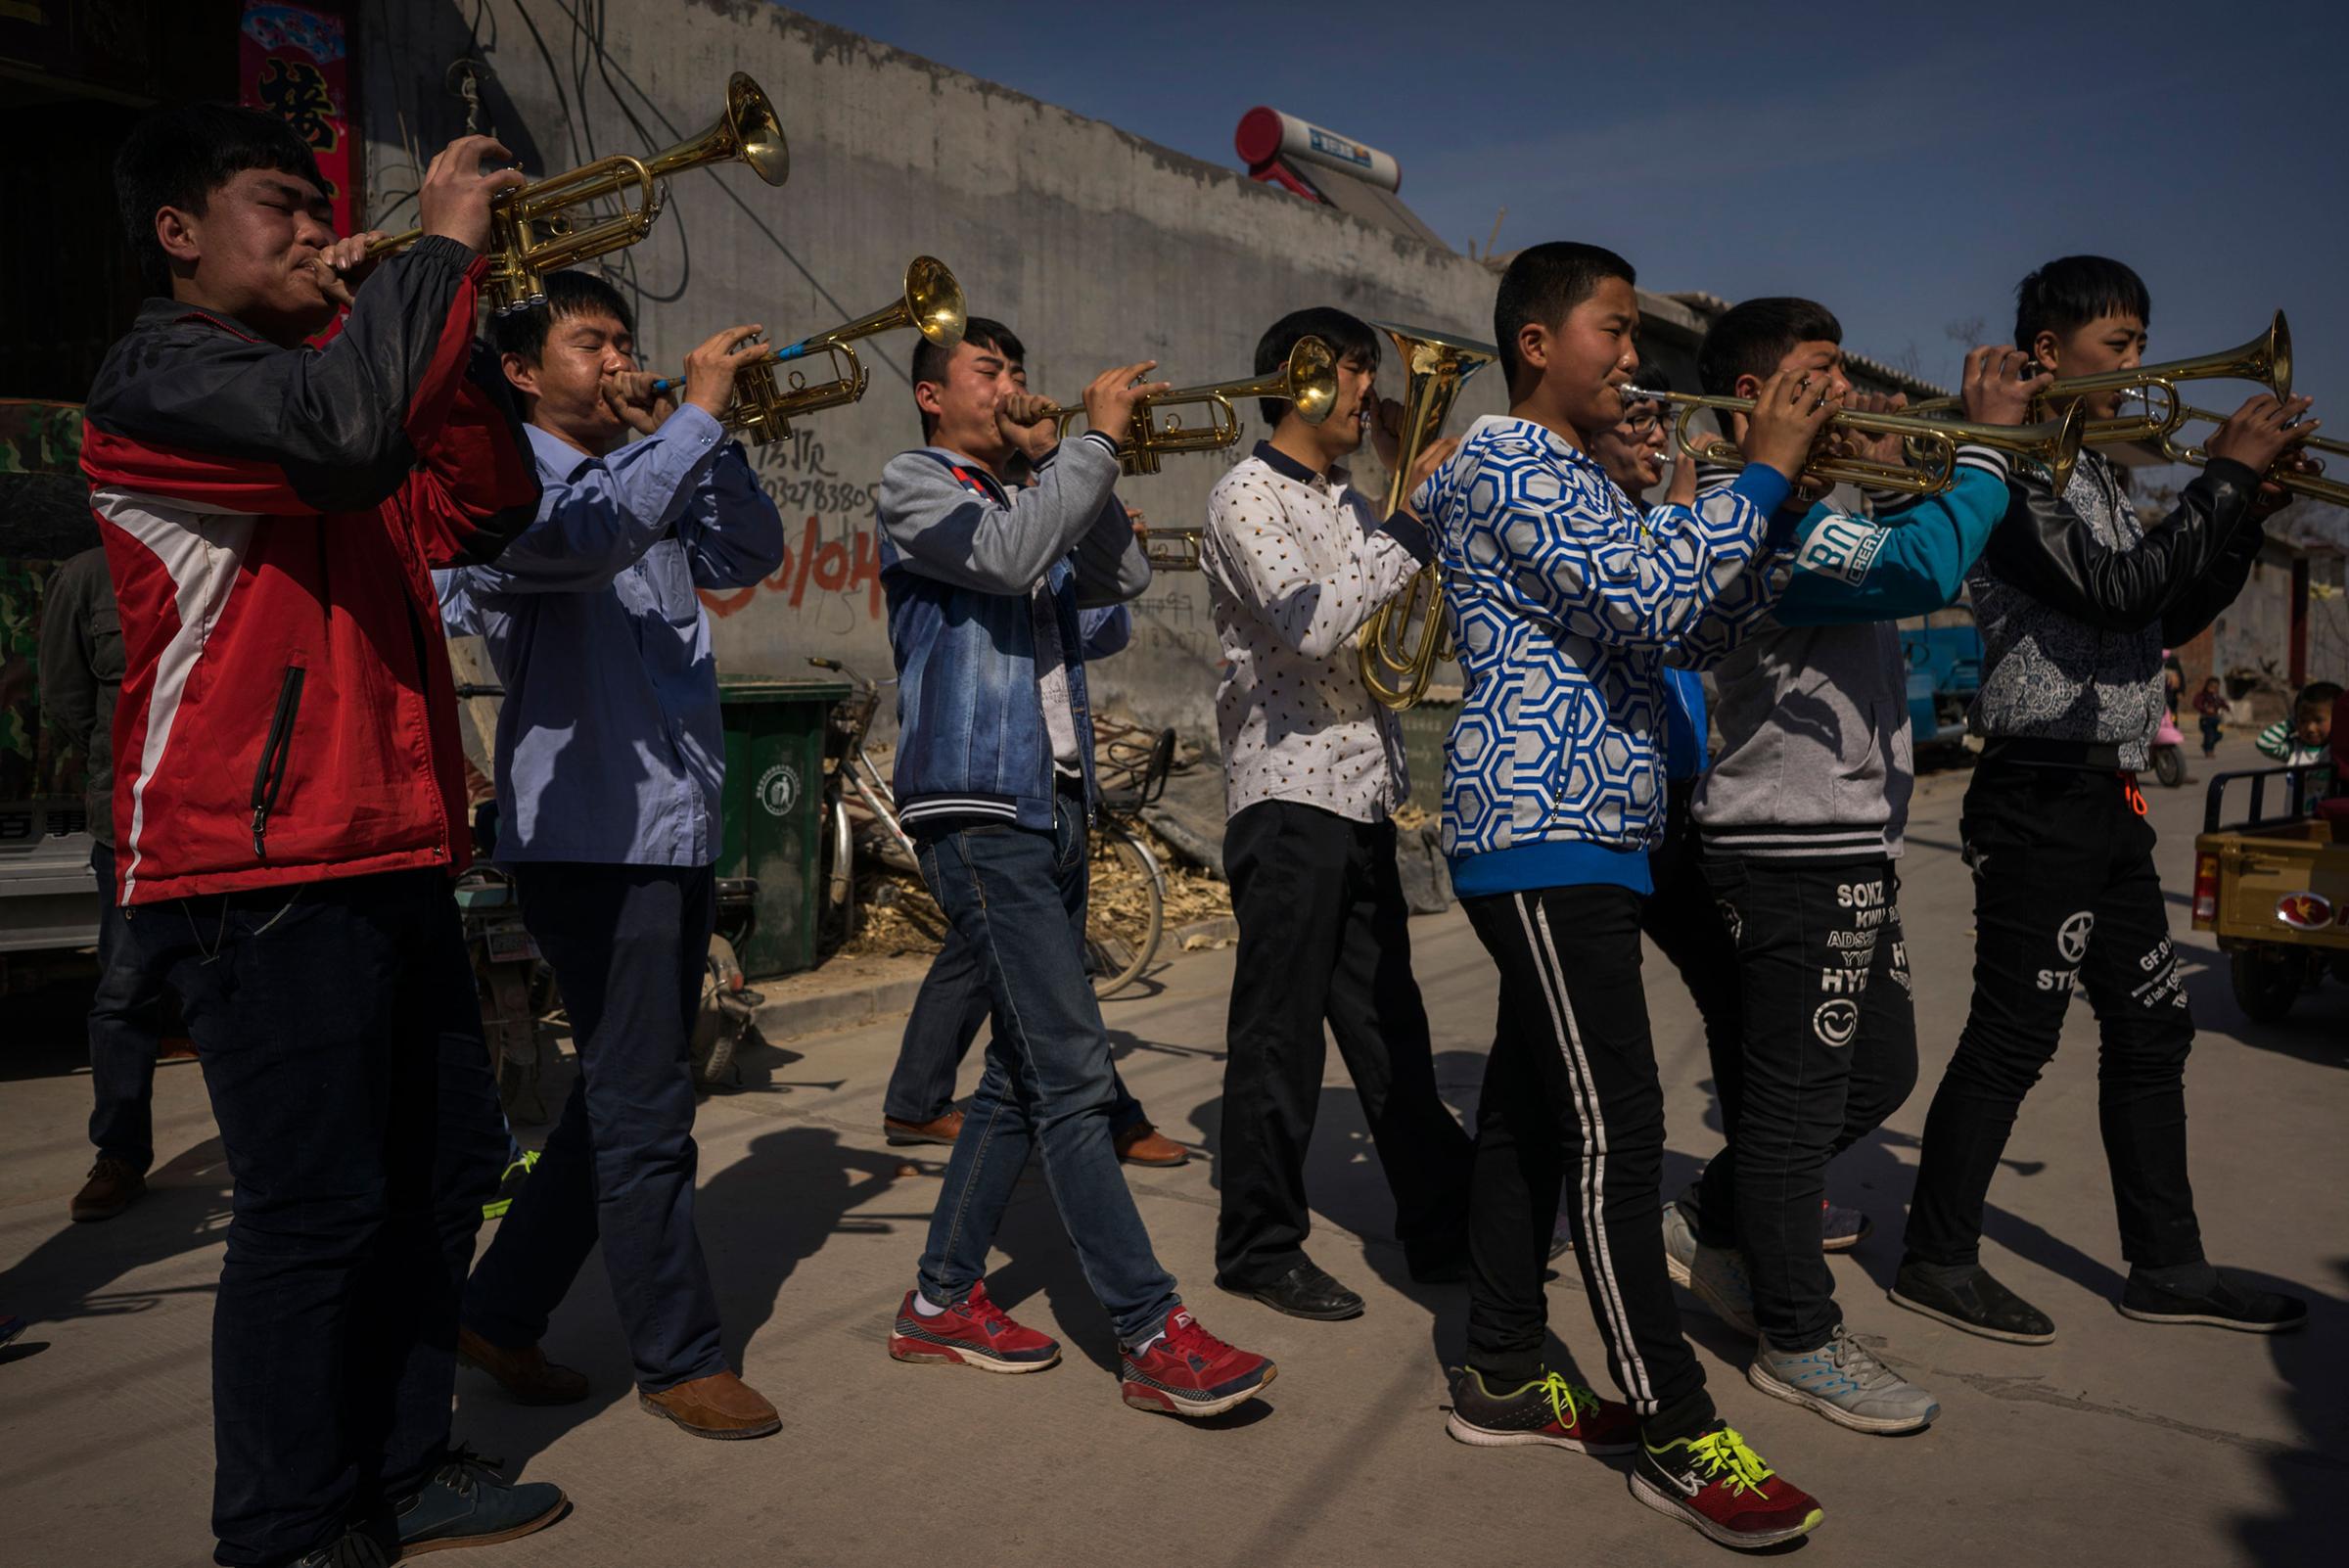 A band plays ahead of an underground Easter Sunday Mass led by dissident Catholic Priest Dong Baolu in the yard of his house in Youtong village, Shijiazhuang, China, March 27, 2016.